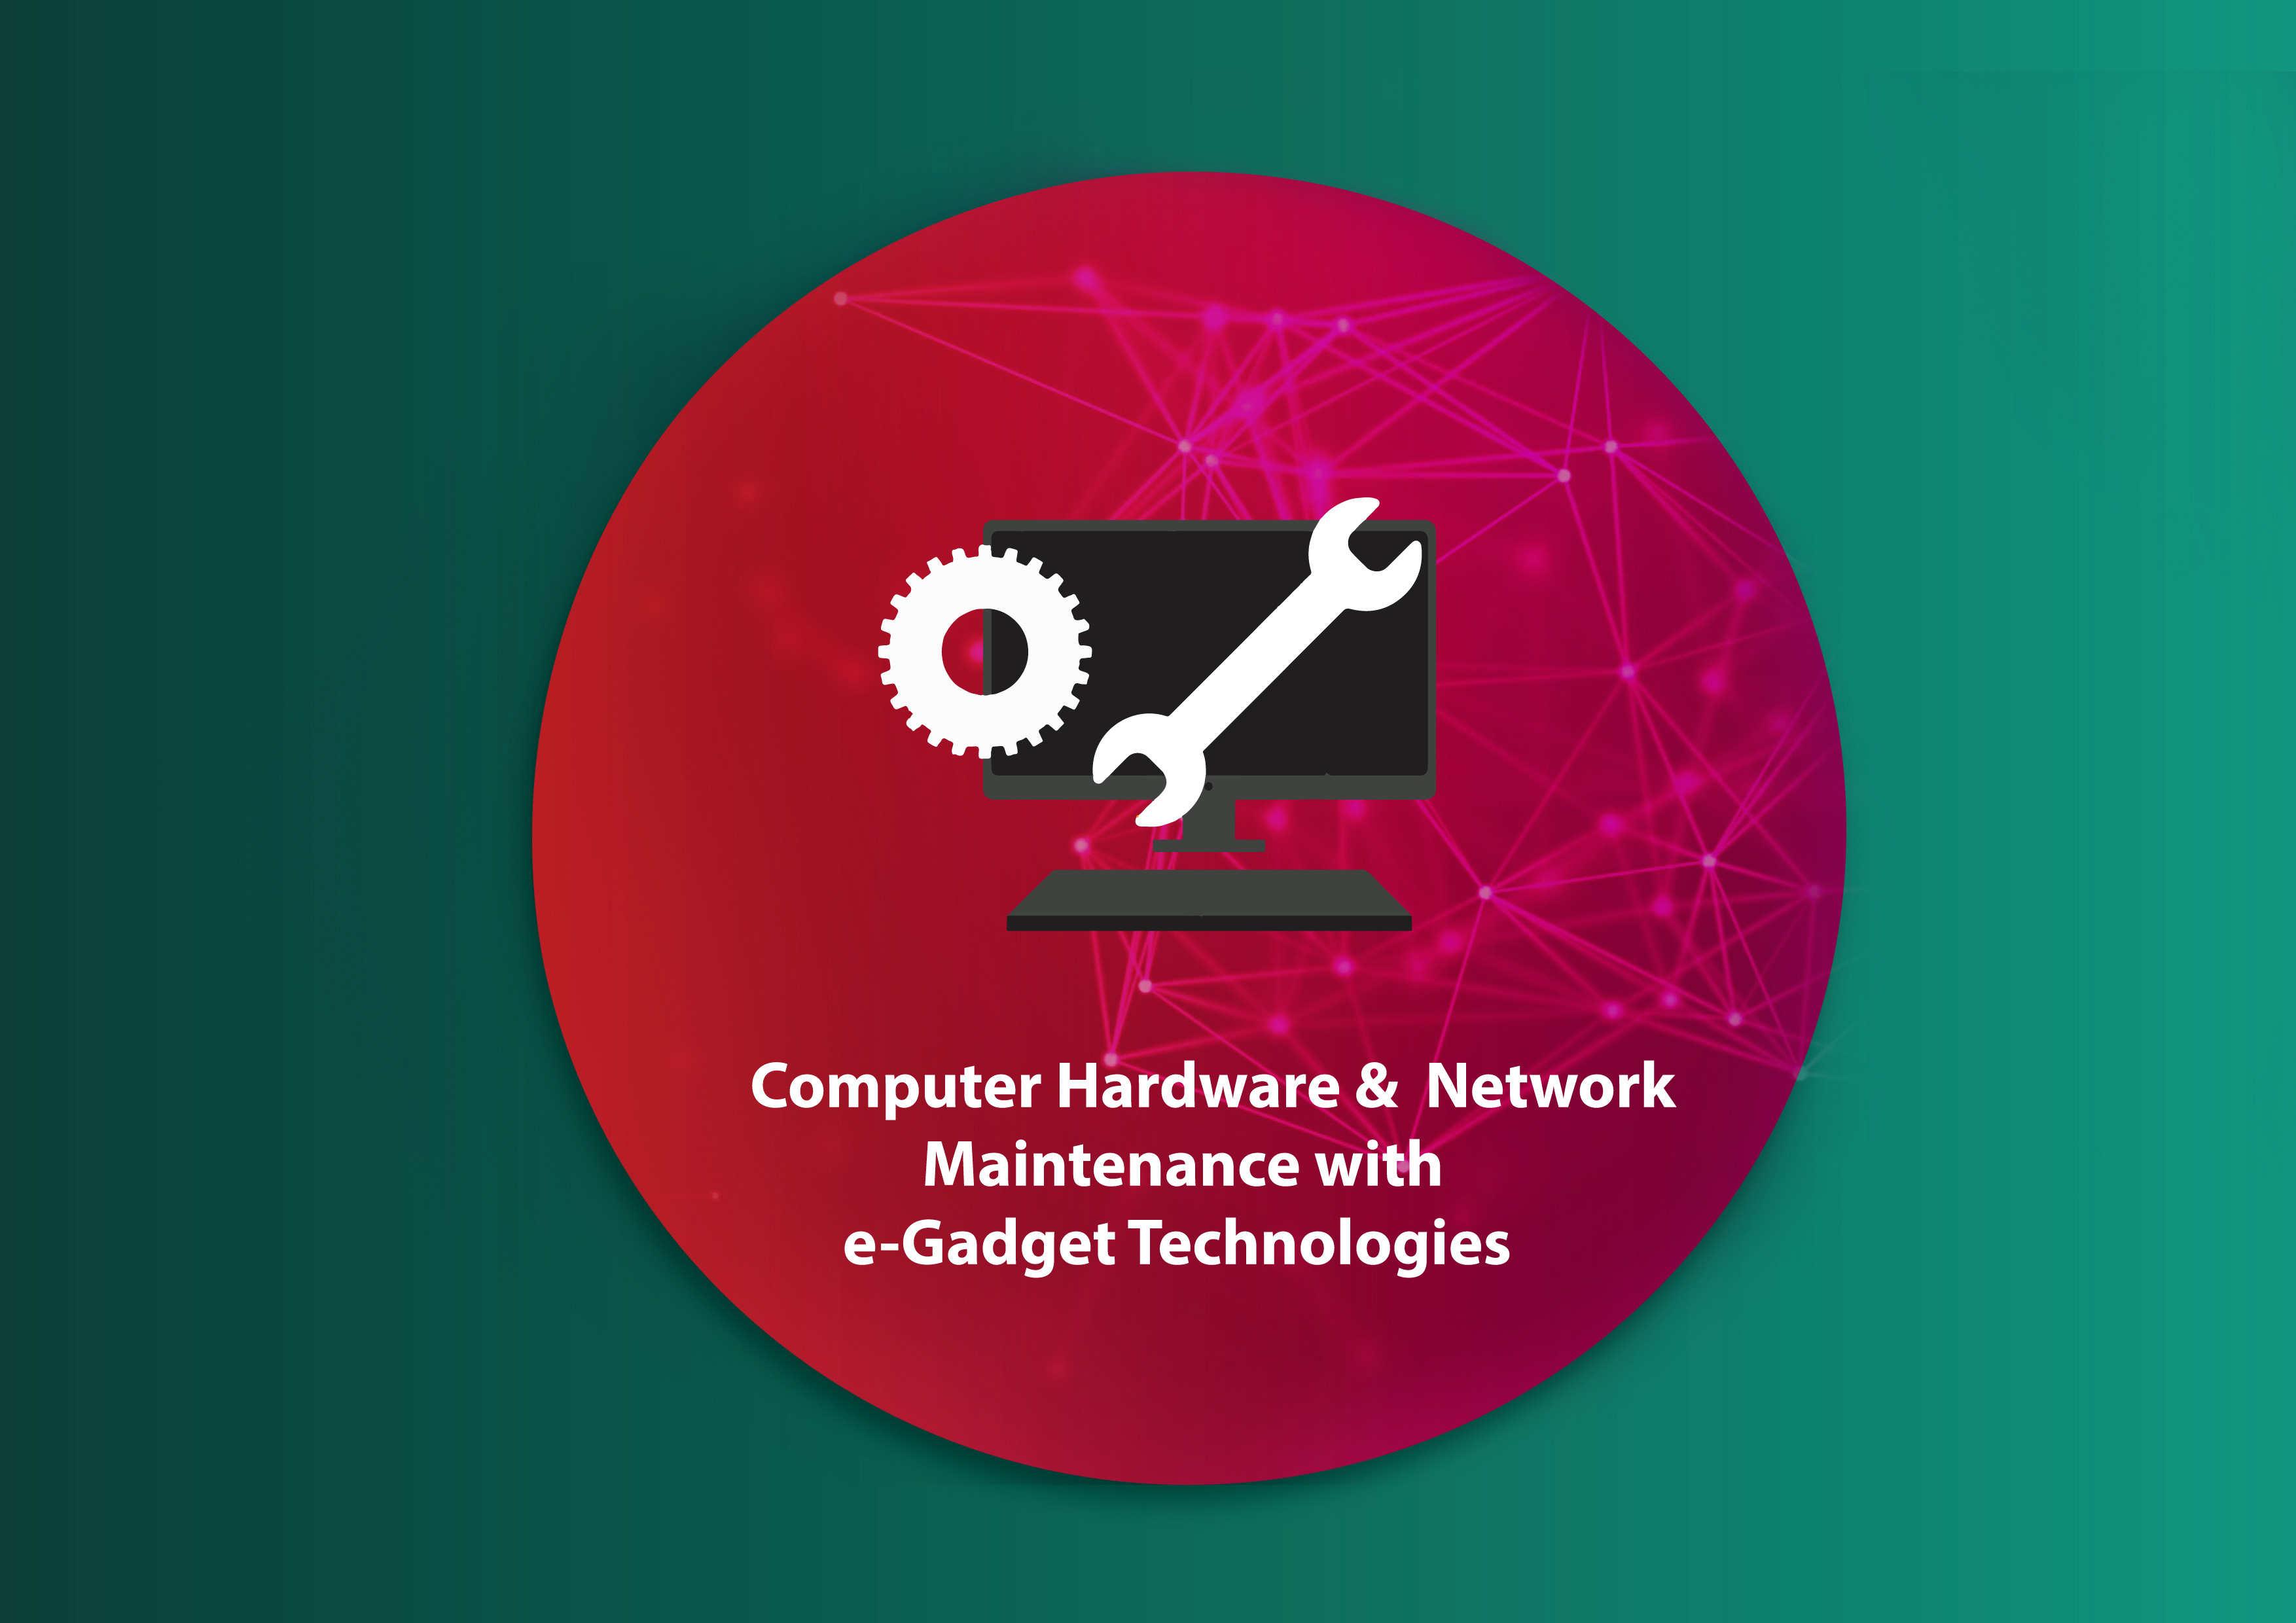 Diploma in Computer Hardware and Network Maintenance with e-Gadget Technologies